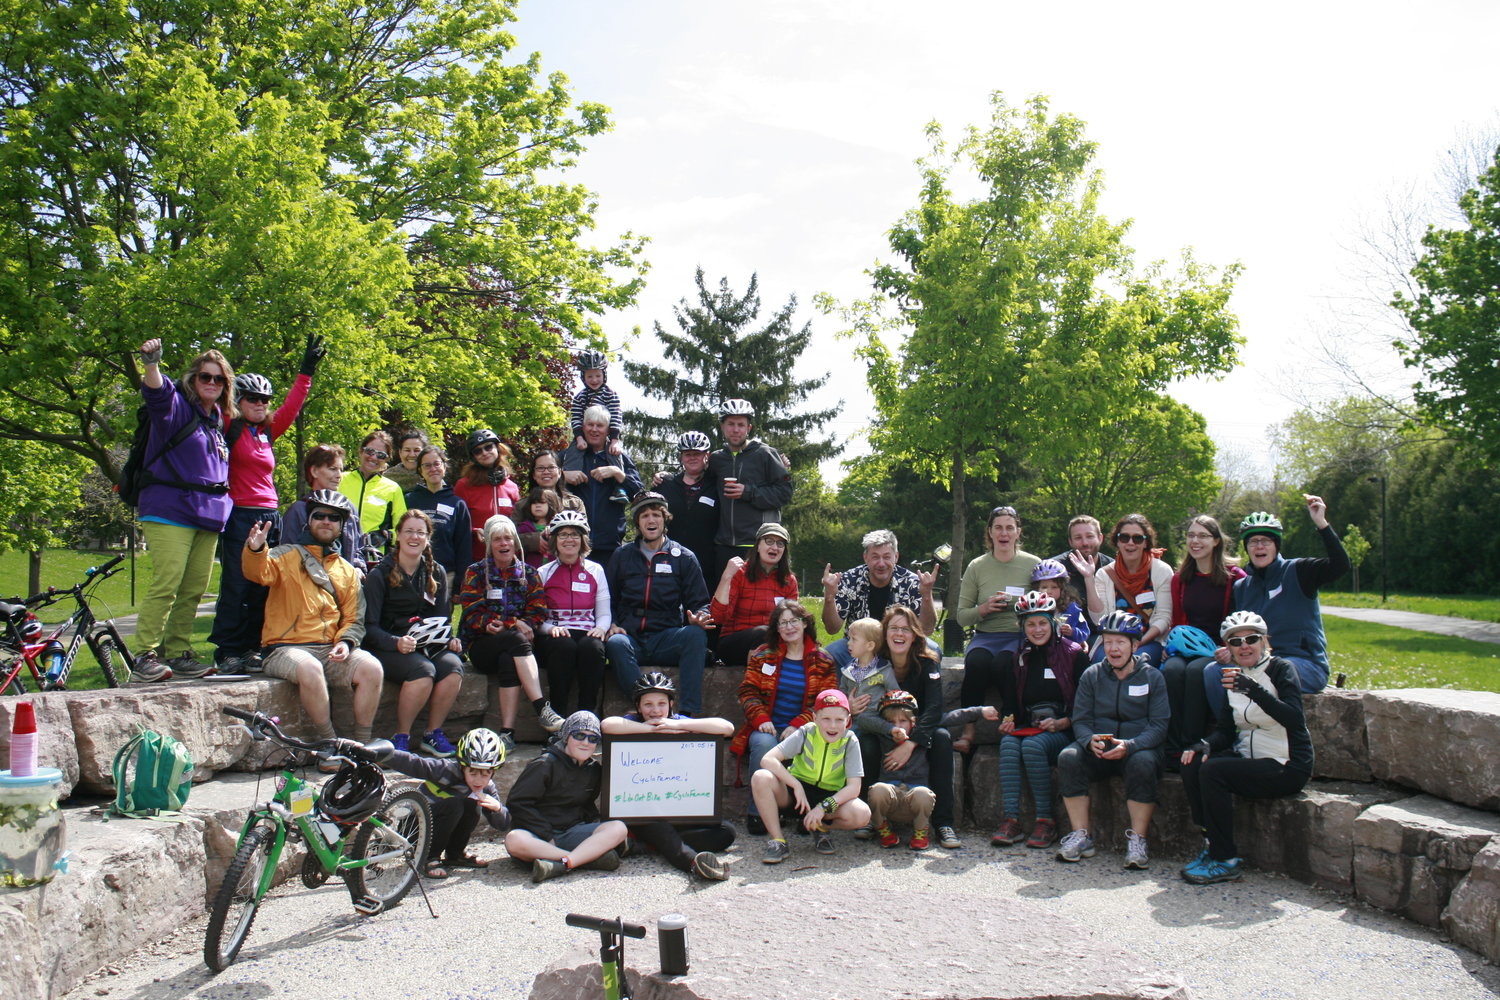 Group photo of event attendees outside in the sun